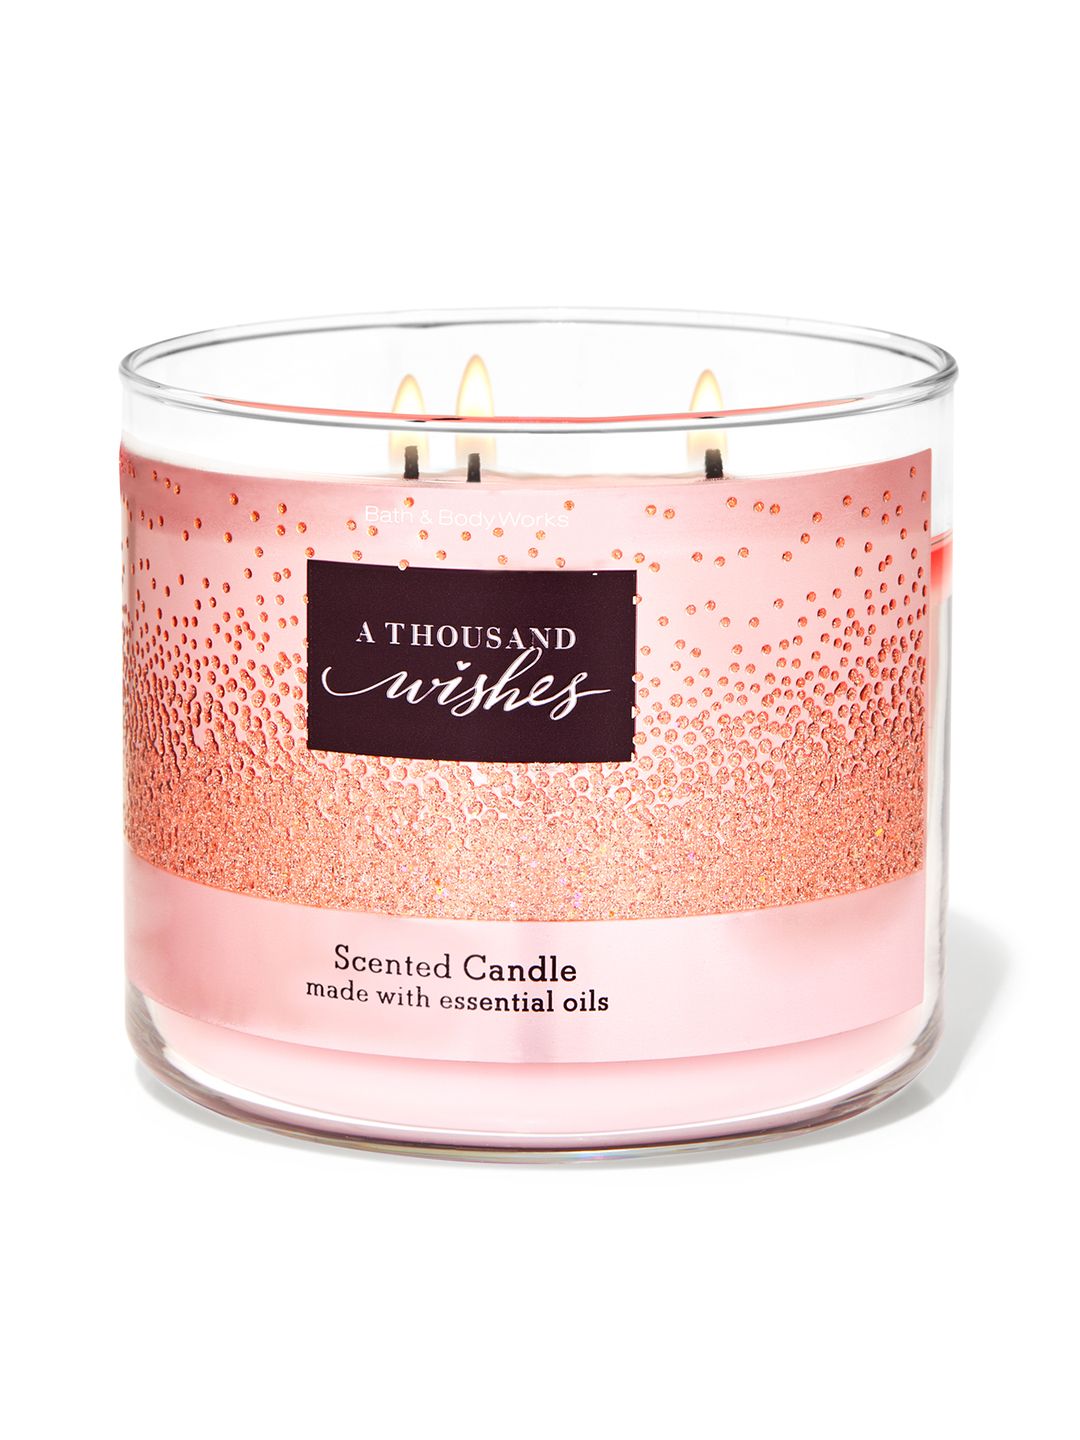 Bath & Body Works A Thousand Wishes 3-Wick Candle - 421 g Price in India